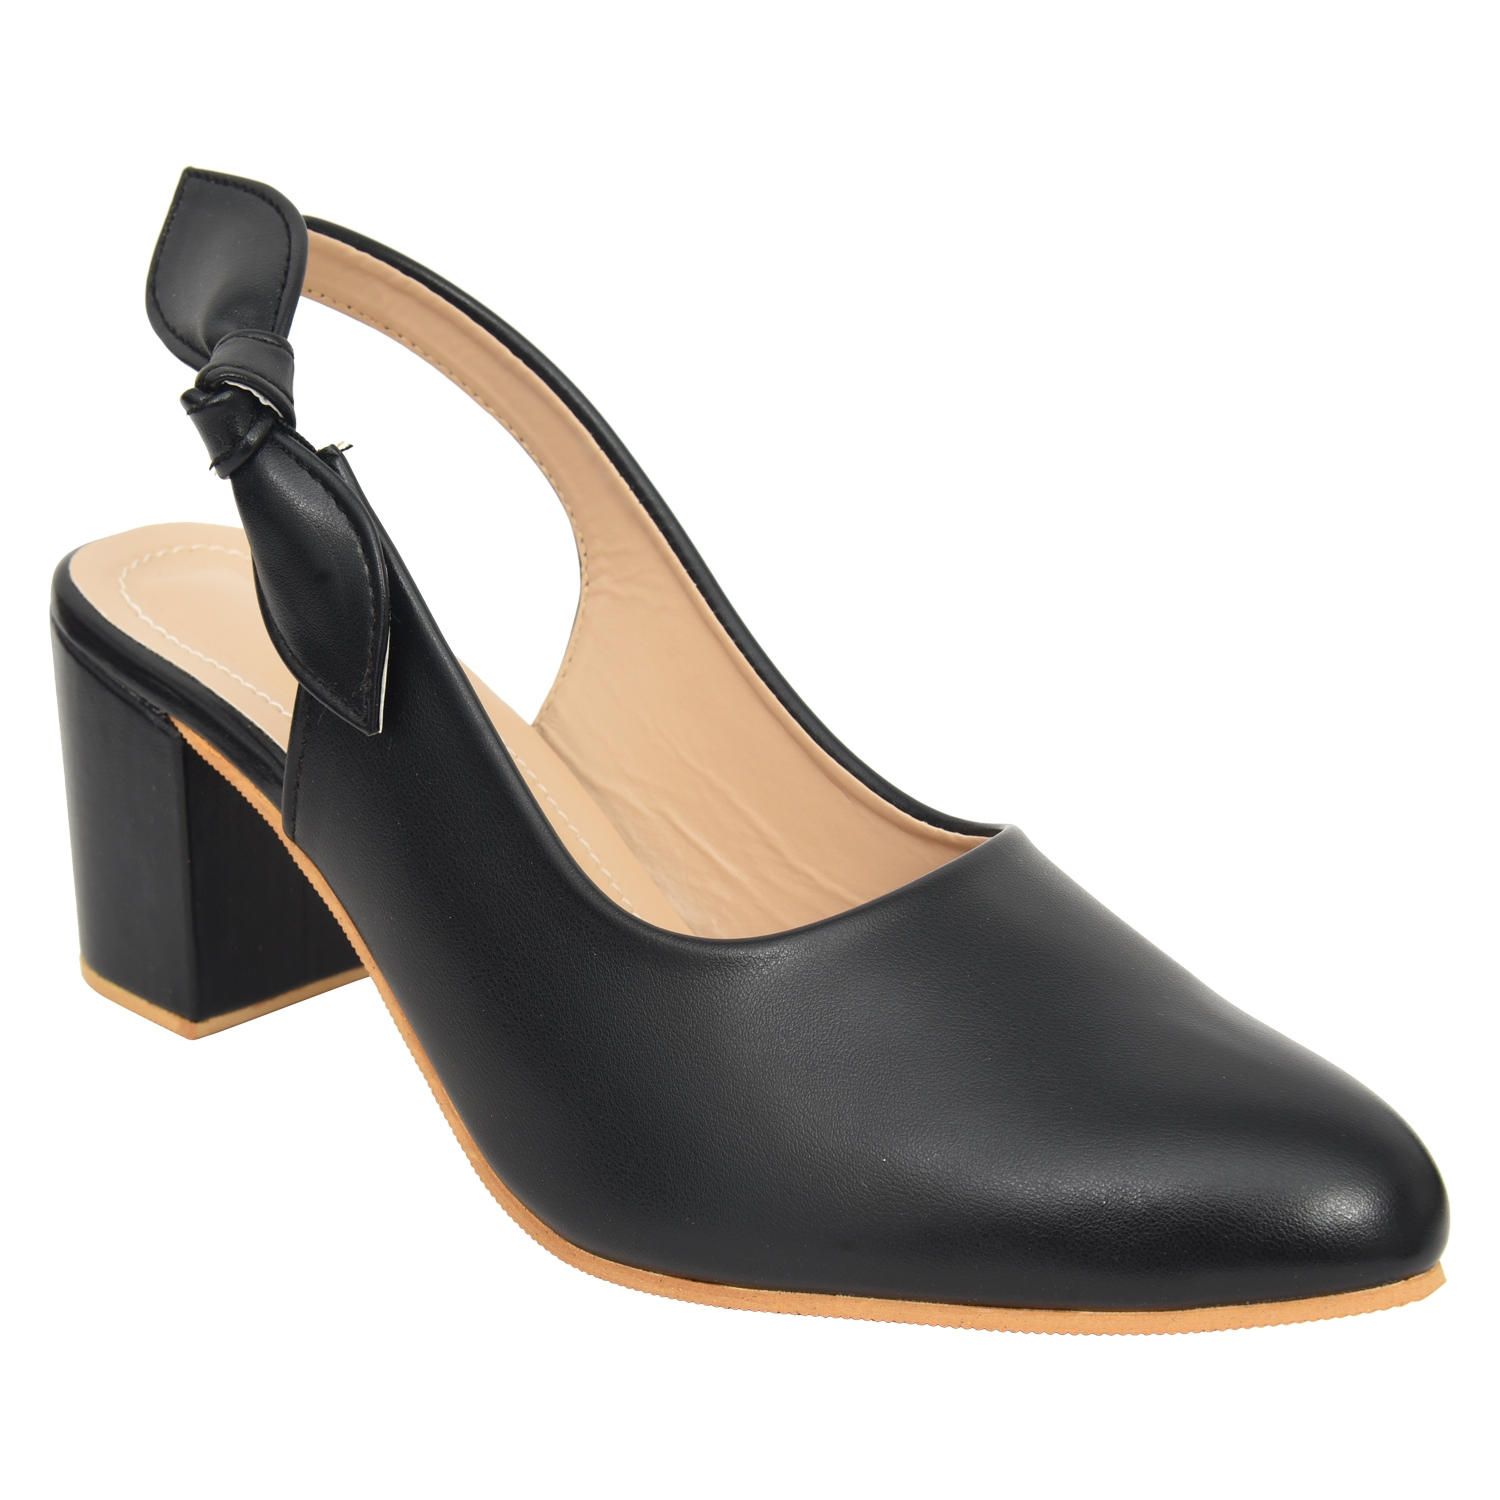 Racecourse | Racecourse Women's Block Heel High Bottom Artificial Leather Full Shoe Belly with the Heel Height of 2.5 Inch 6011 Black